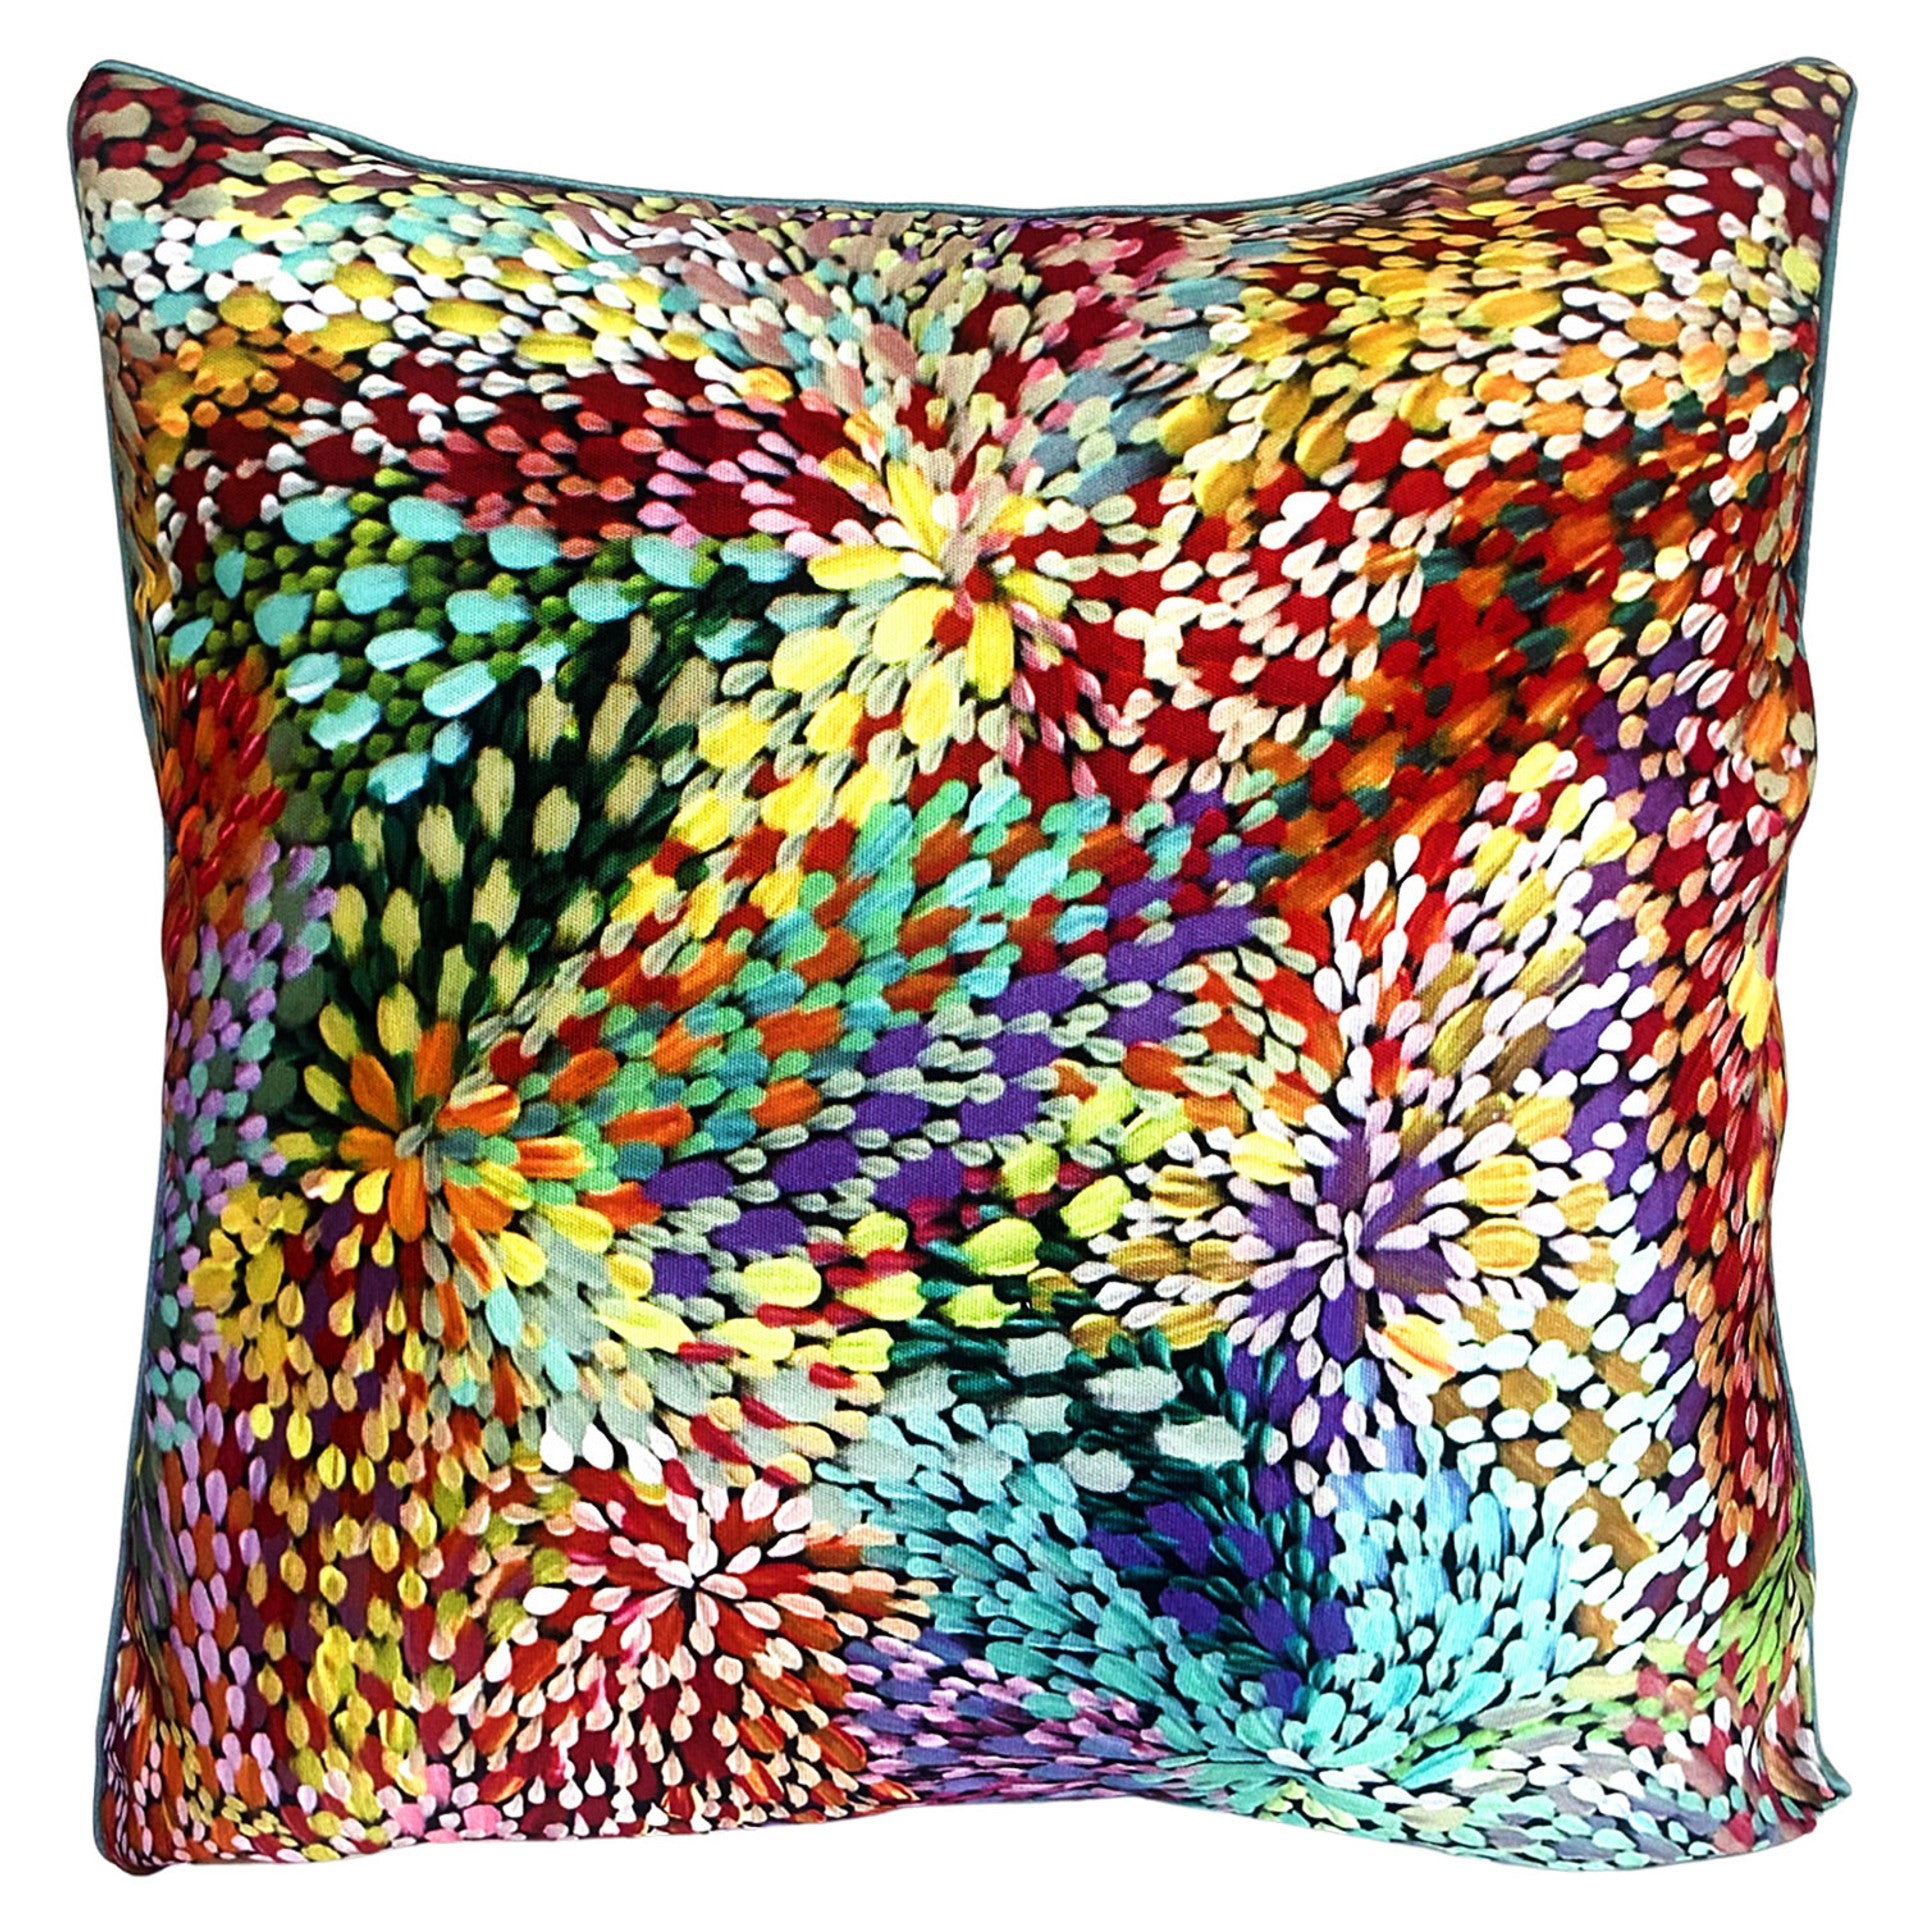 Outdoor Cushion Cover - Janelle Stockman